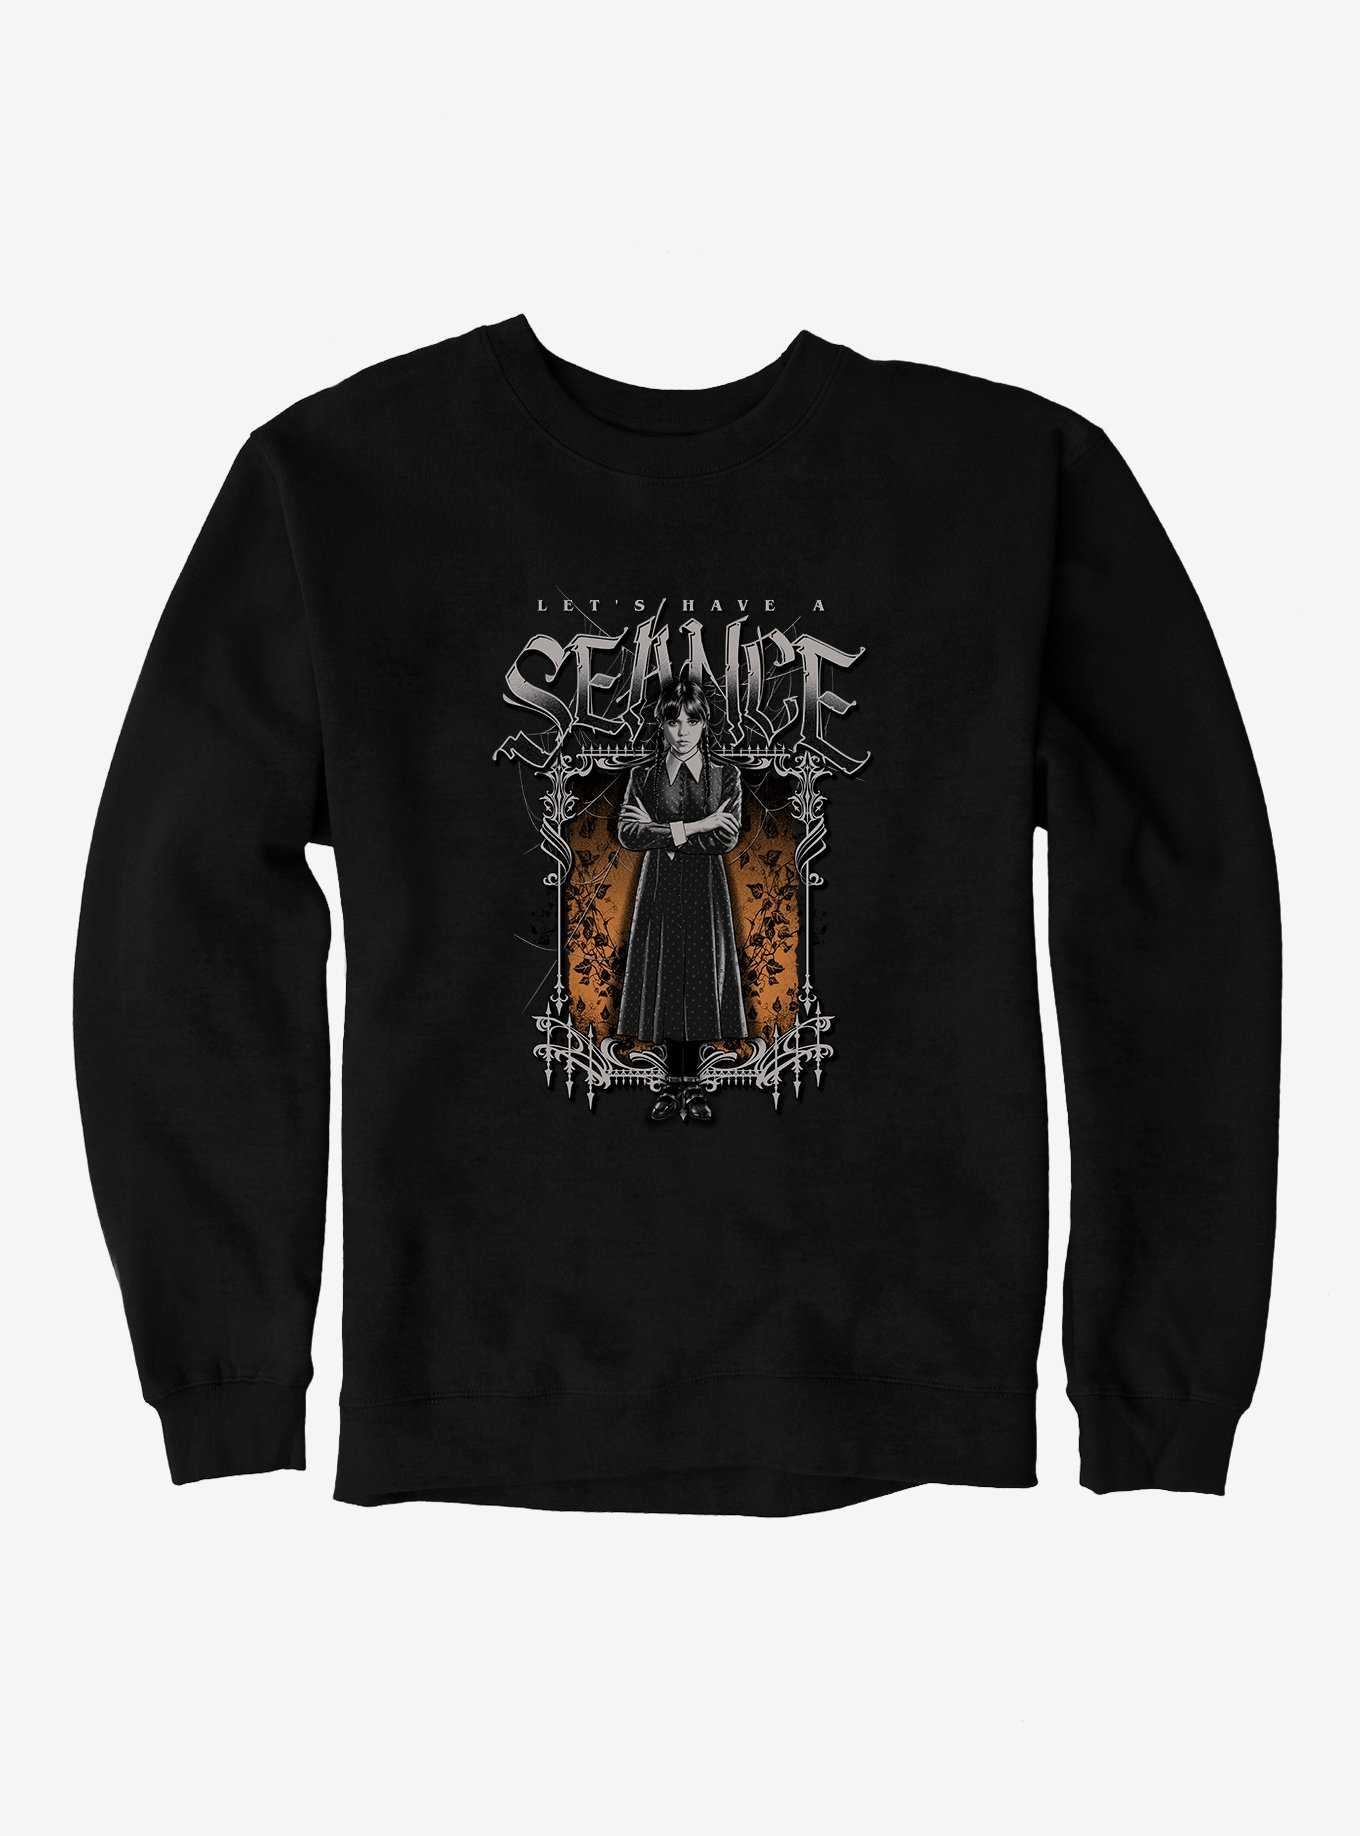 Wednesday Let's Have A Seance Sweatshirt, , hi-res